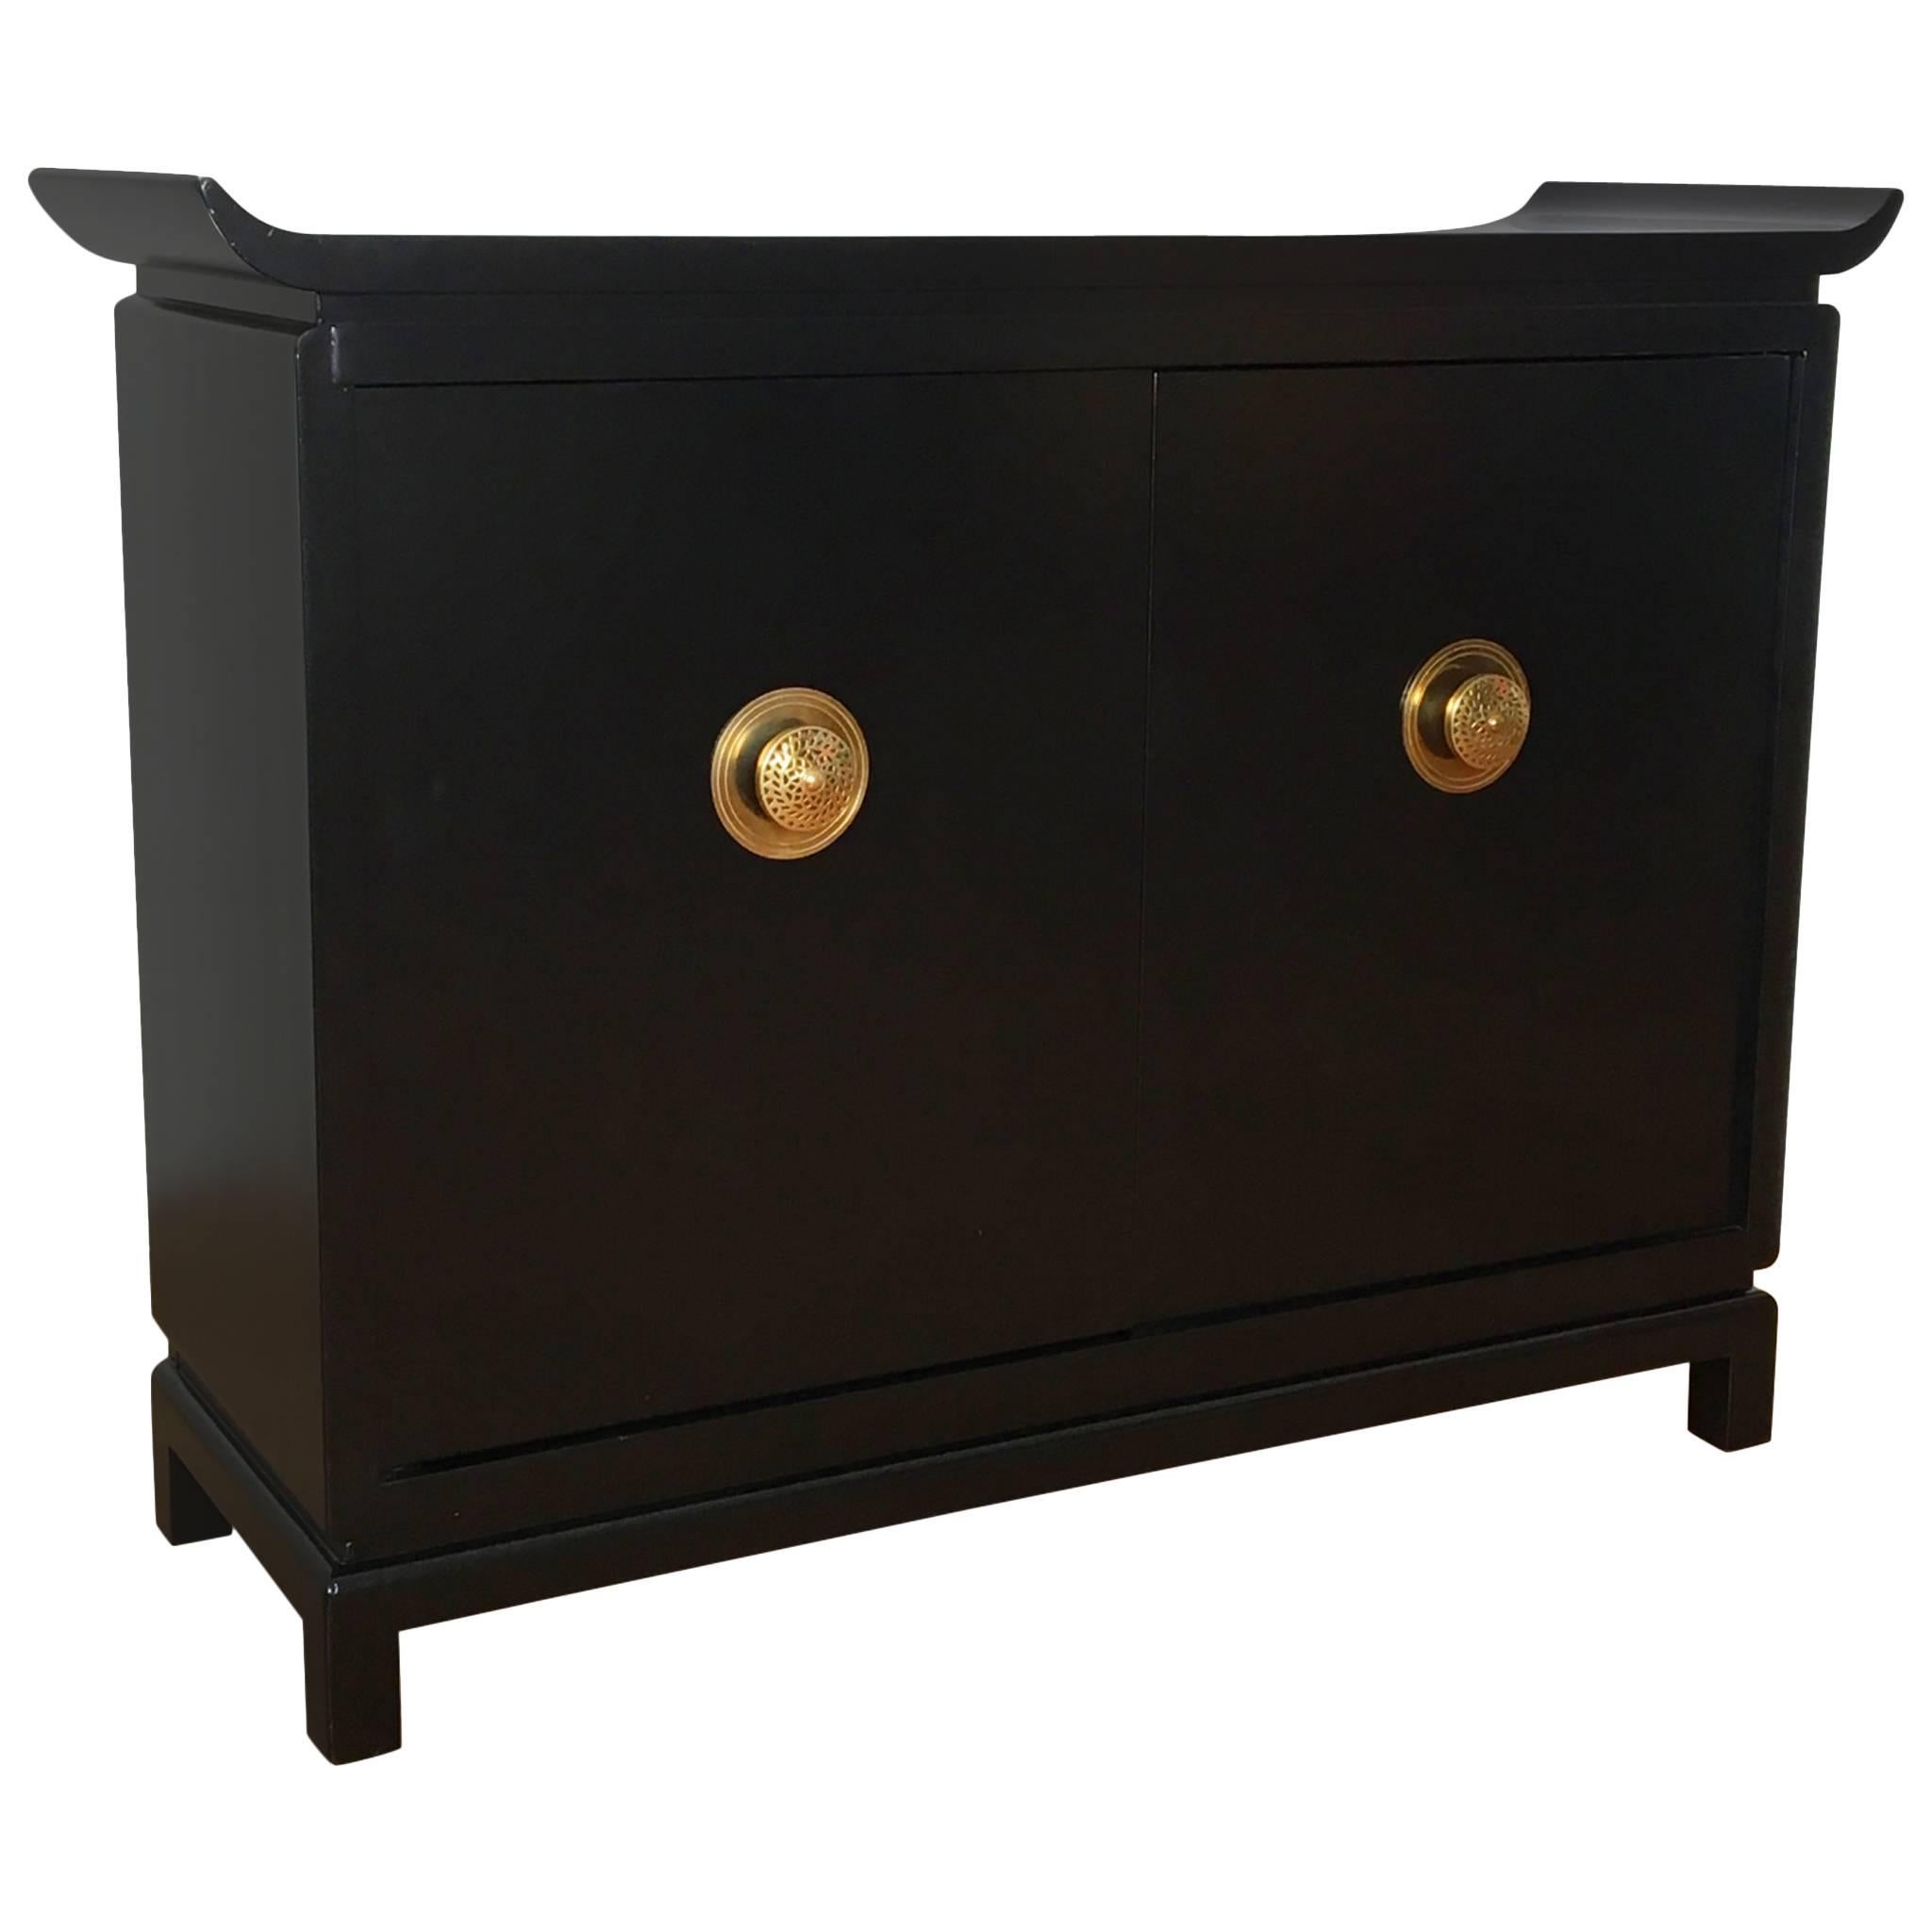 1950s Black Lacquer and Brass Cabinet Signed by James Mont